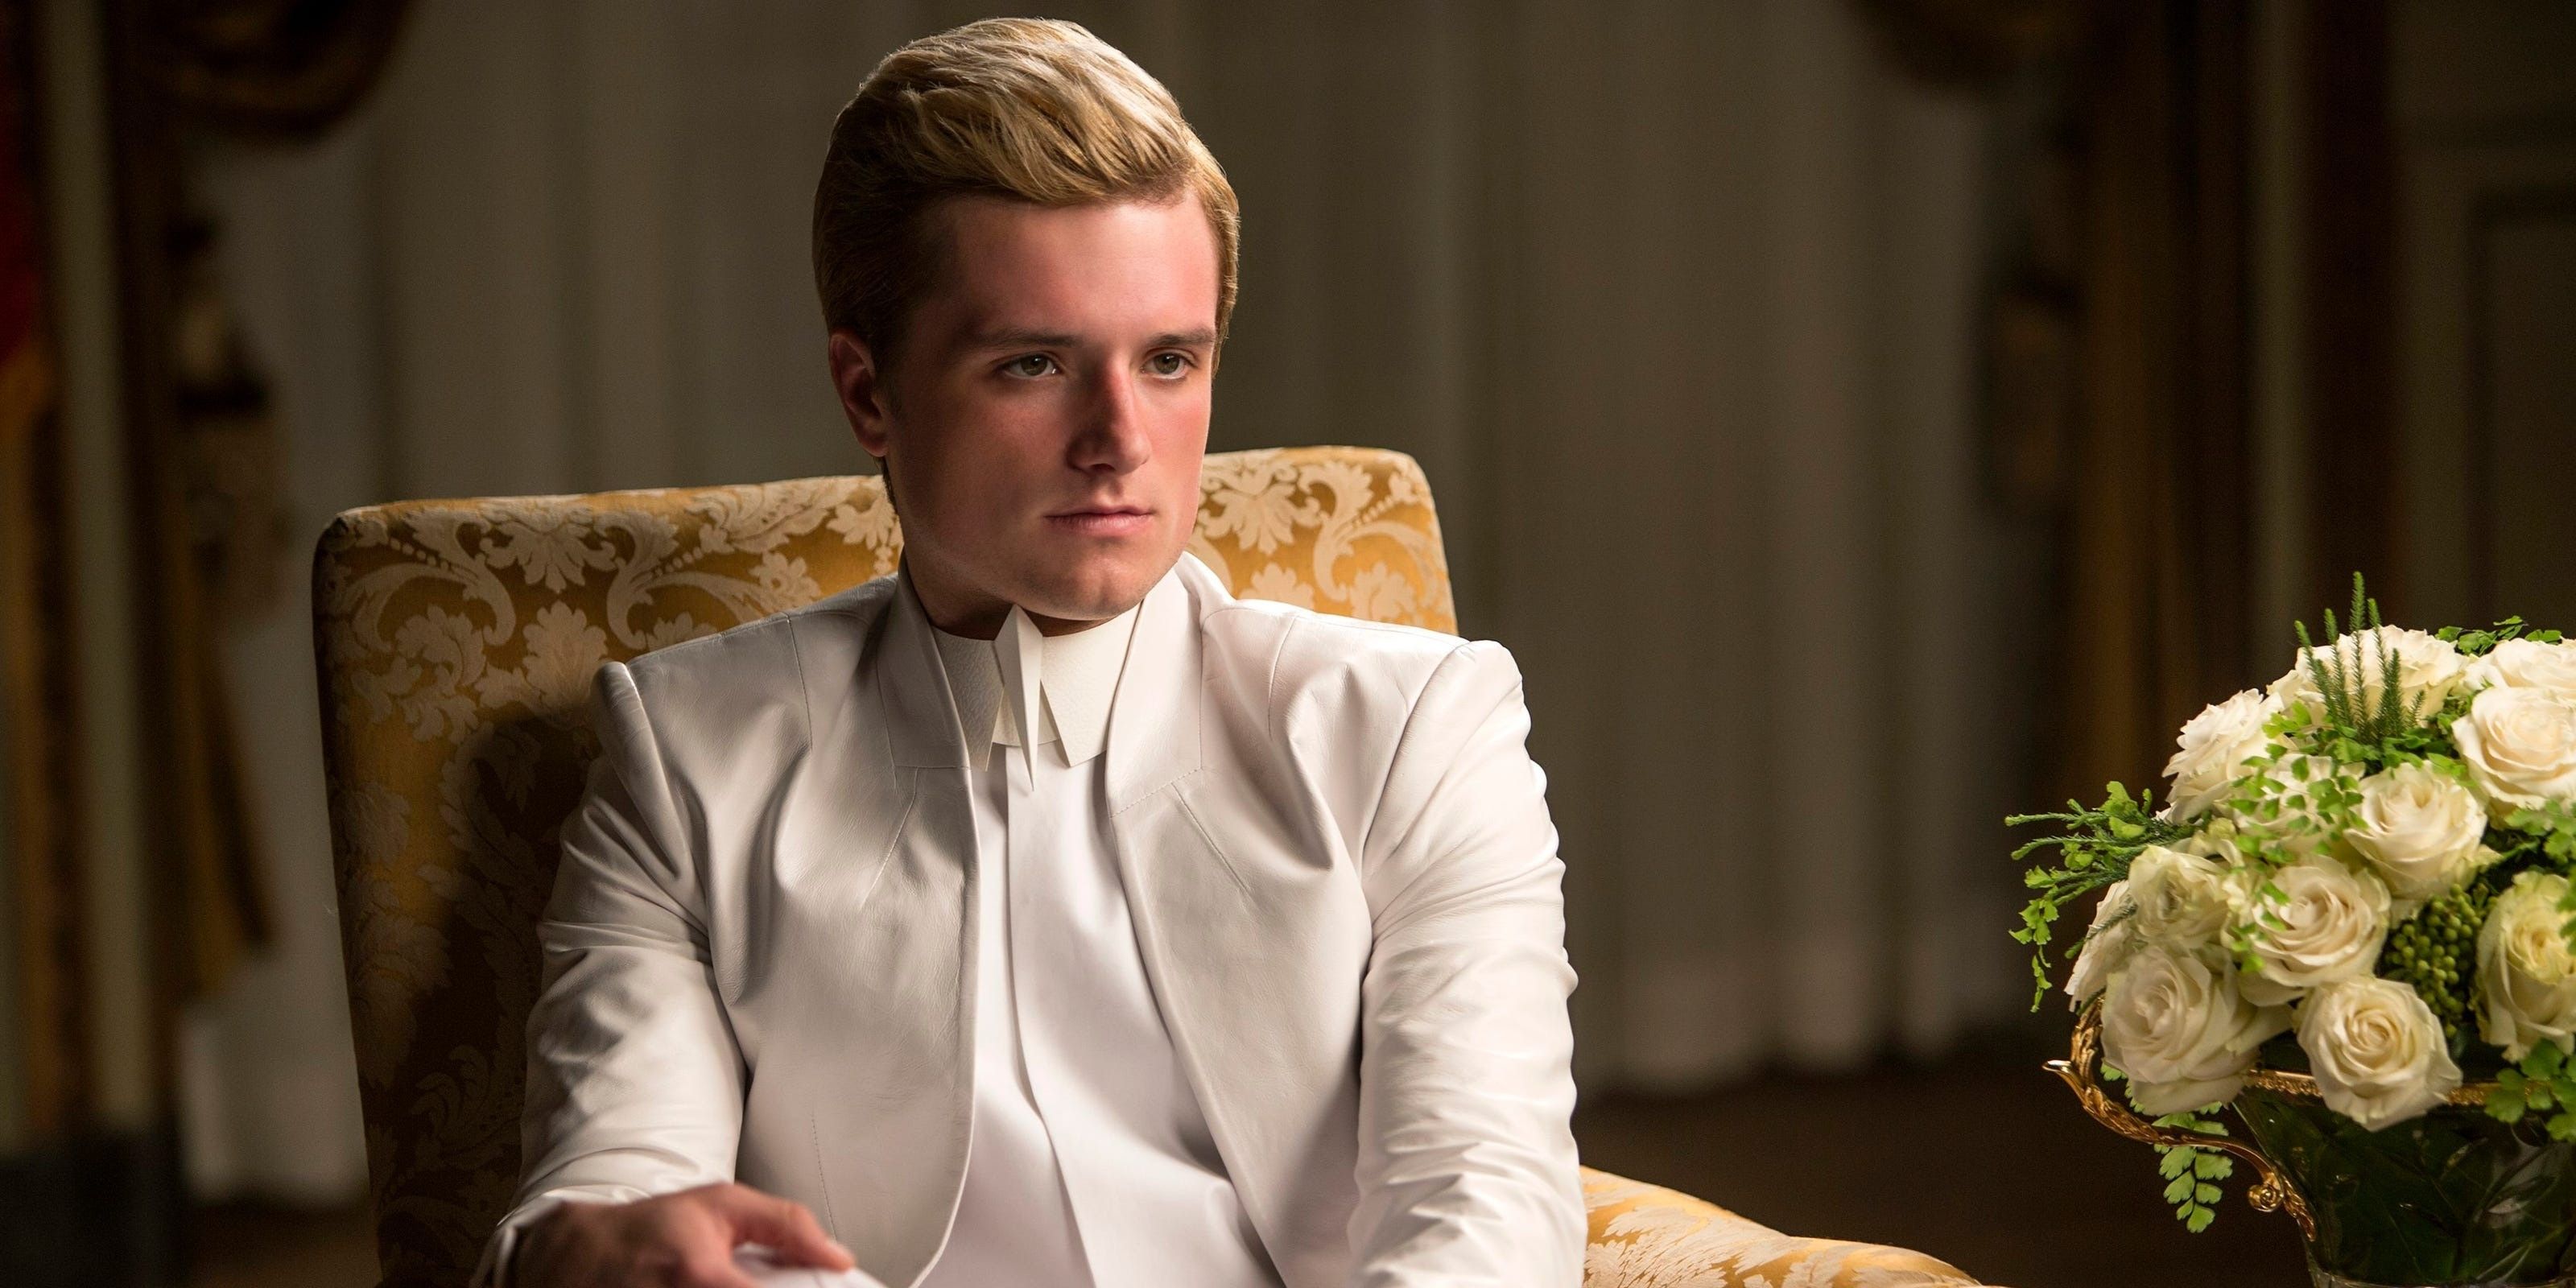 Peeta Mellark sitting and wearing a white suit in The Hunger Games: Mockingjay Part 1.